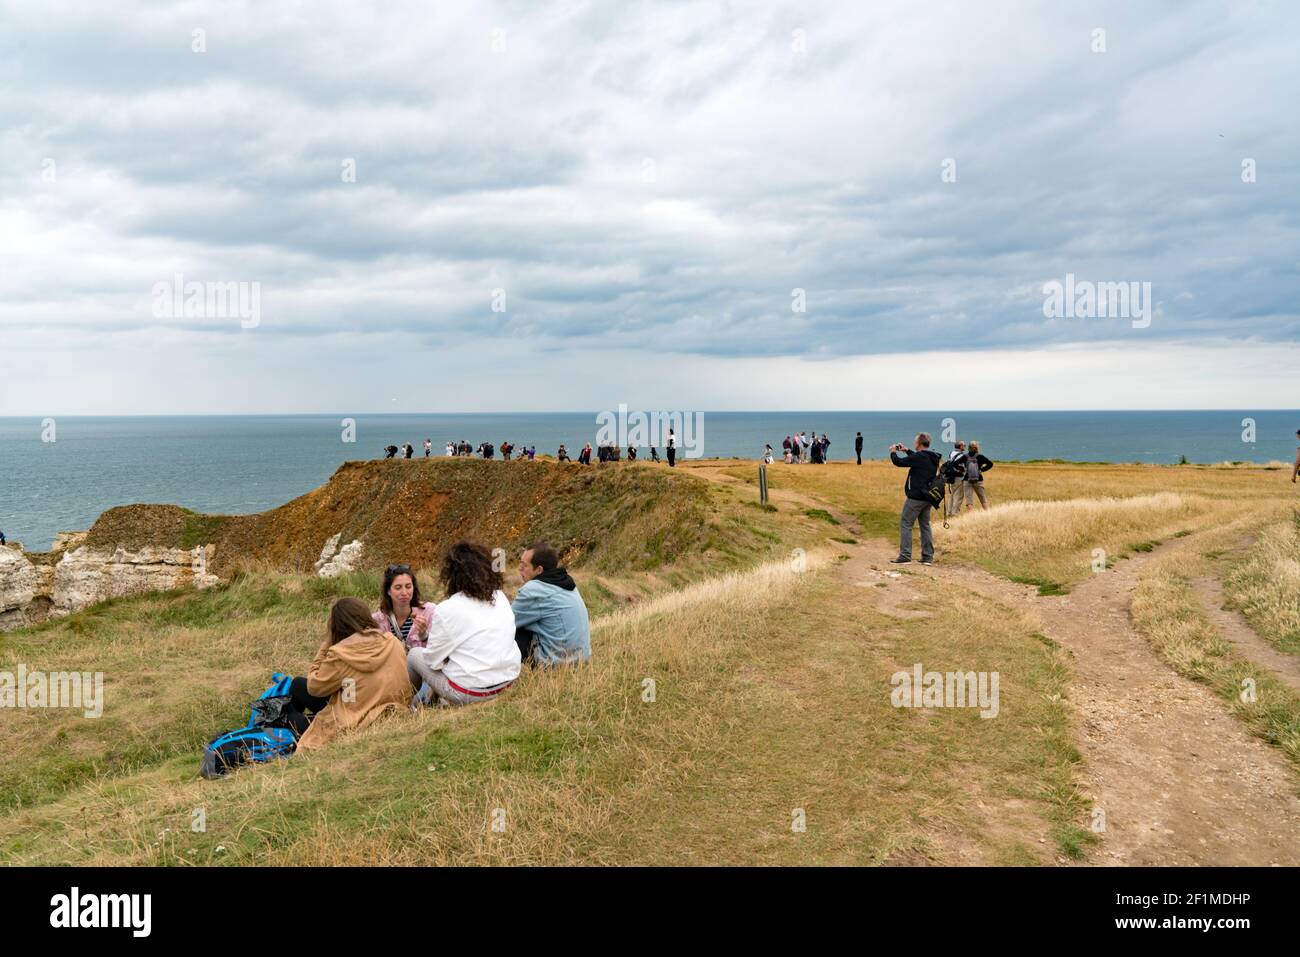 Tourists enjoy hiking and picknicking on the Normandy coast along the Falaise de Etretat cliffs abov Stock Photo